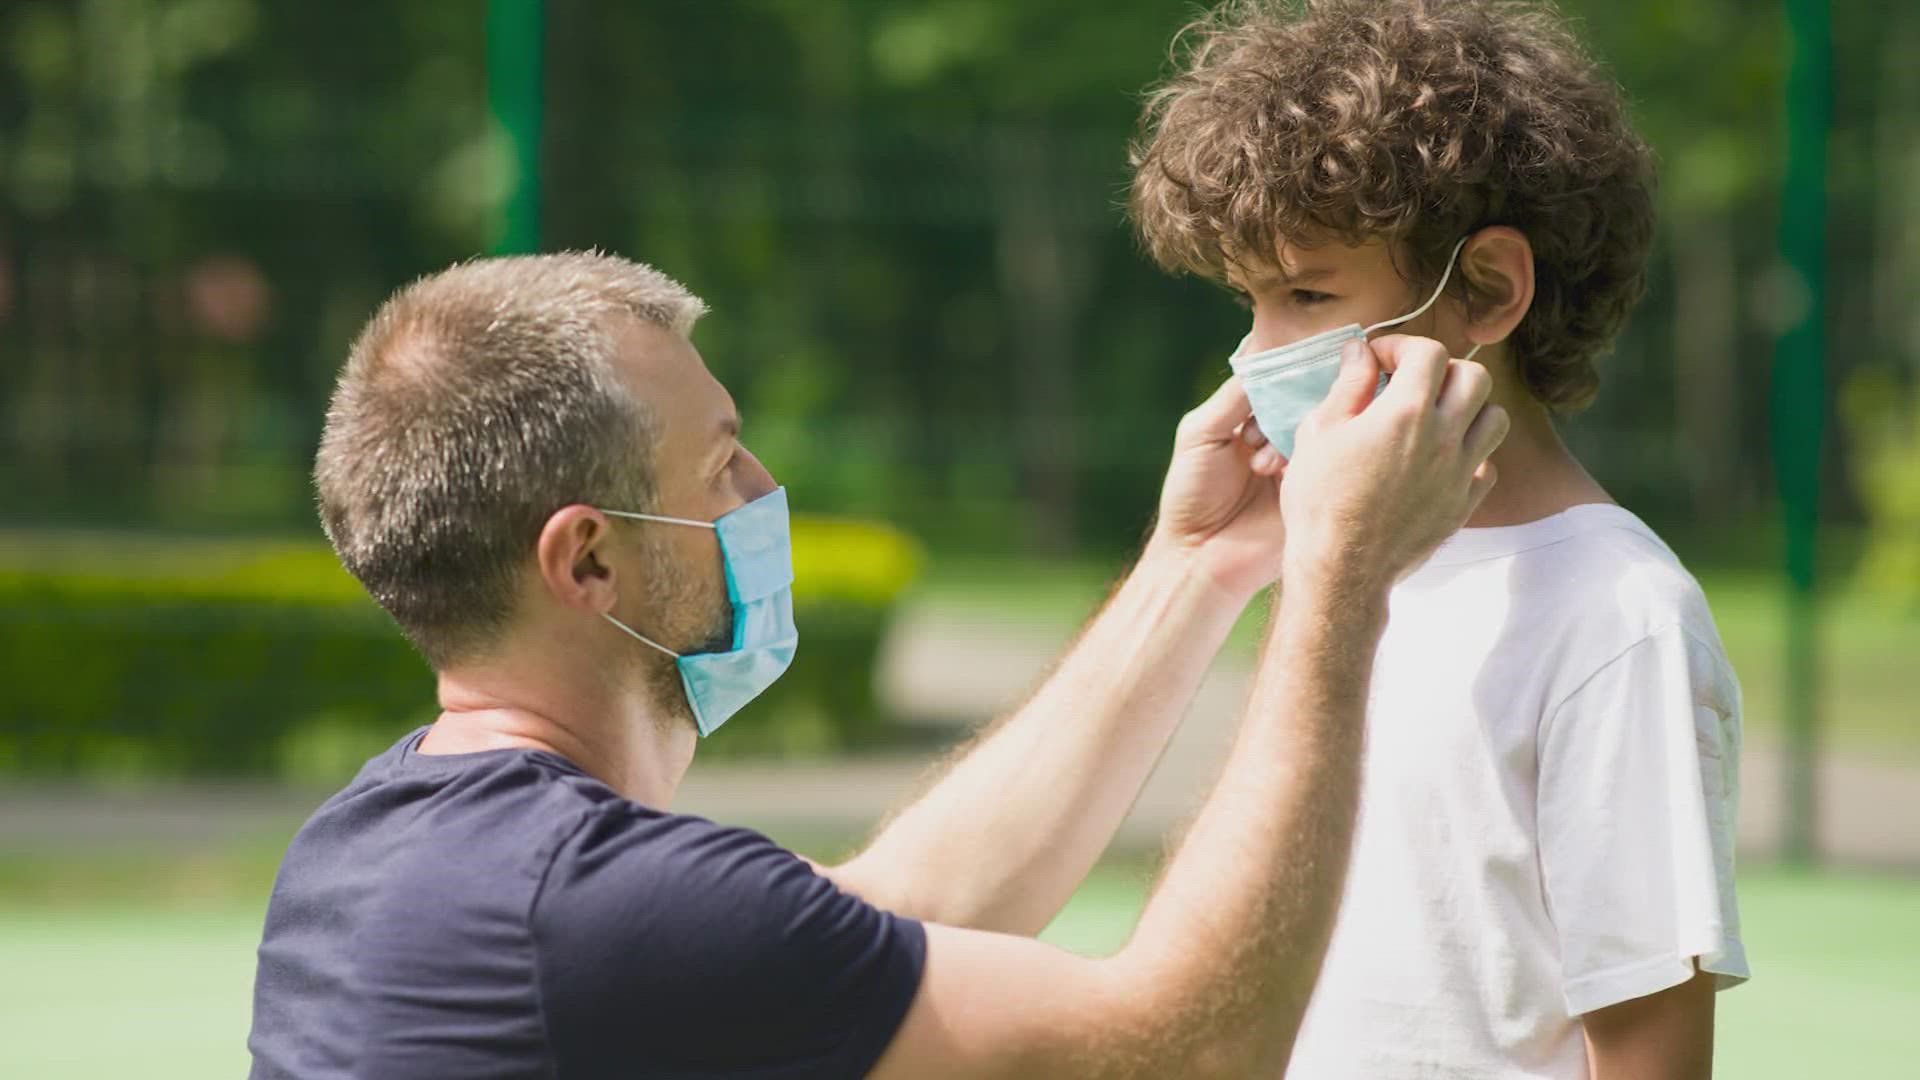 Although N95 masks offer the greatest protection, they can be hard to find for kids right now. Here are a couple of backup plans to help keep your kids healthy.